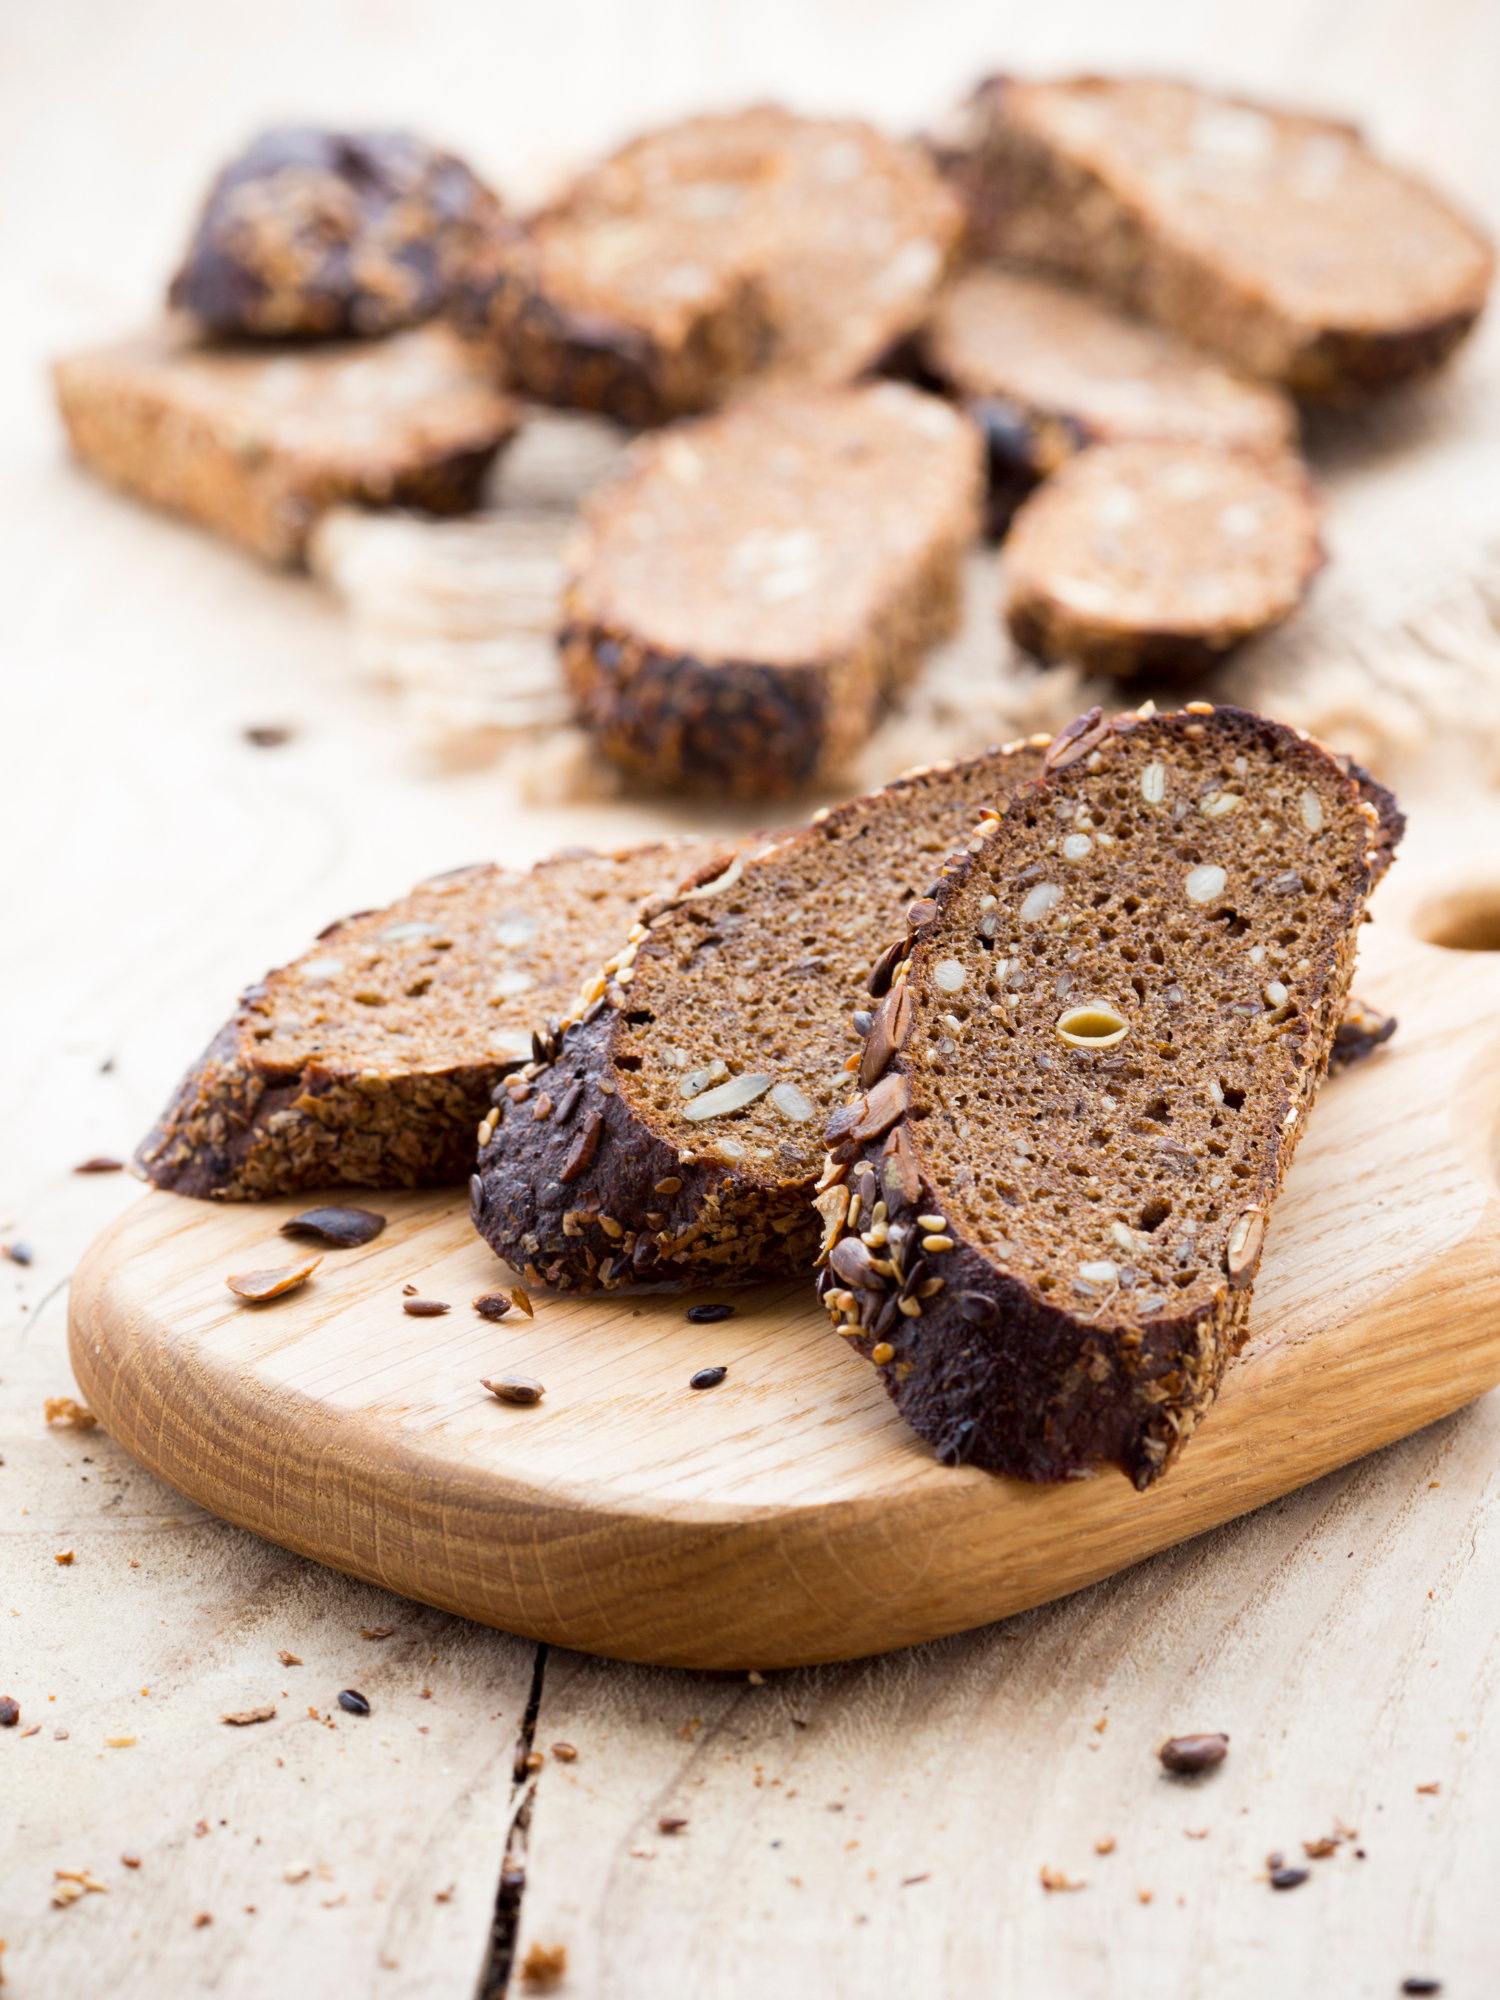 slices of rye bread which is best for acid reflux